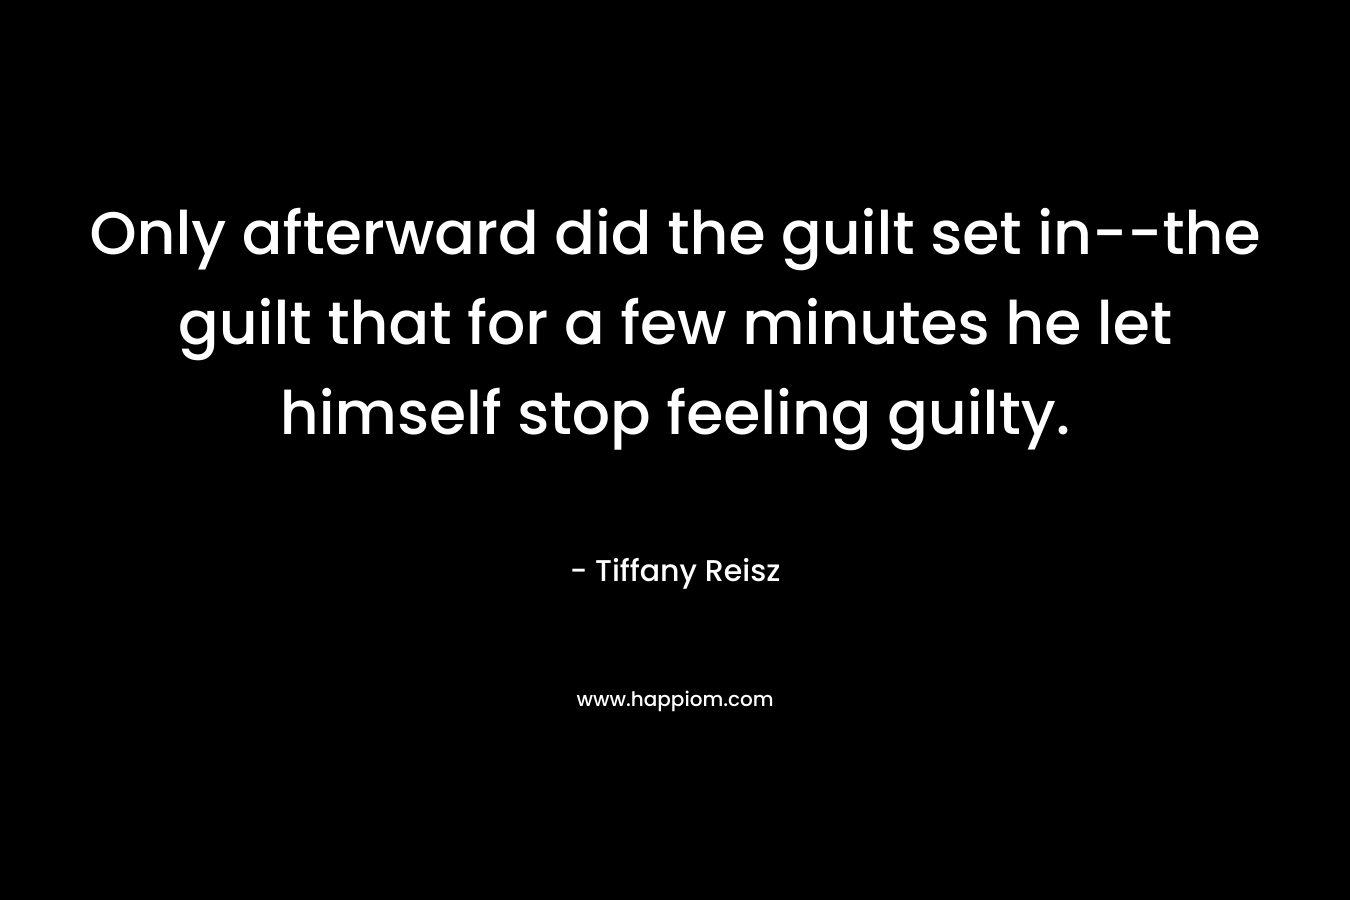 Only afterward did the guilt set in–the guilt that for a few minutes he let himself stop feeling guilty. – Tiffany Reisz